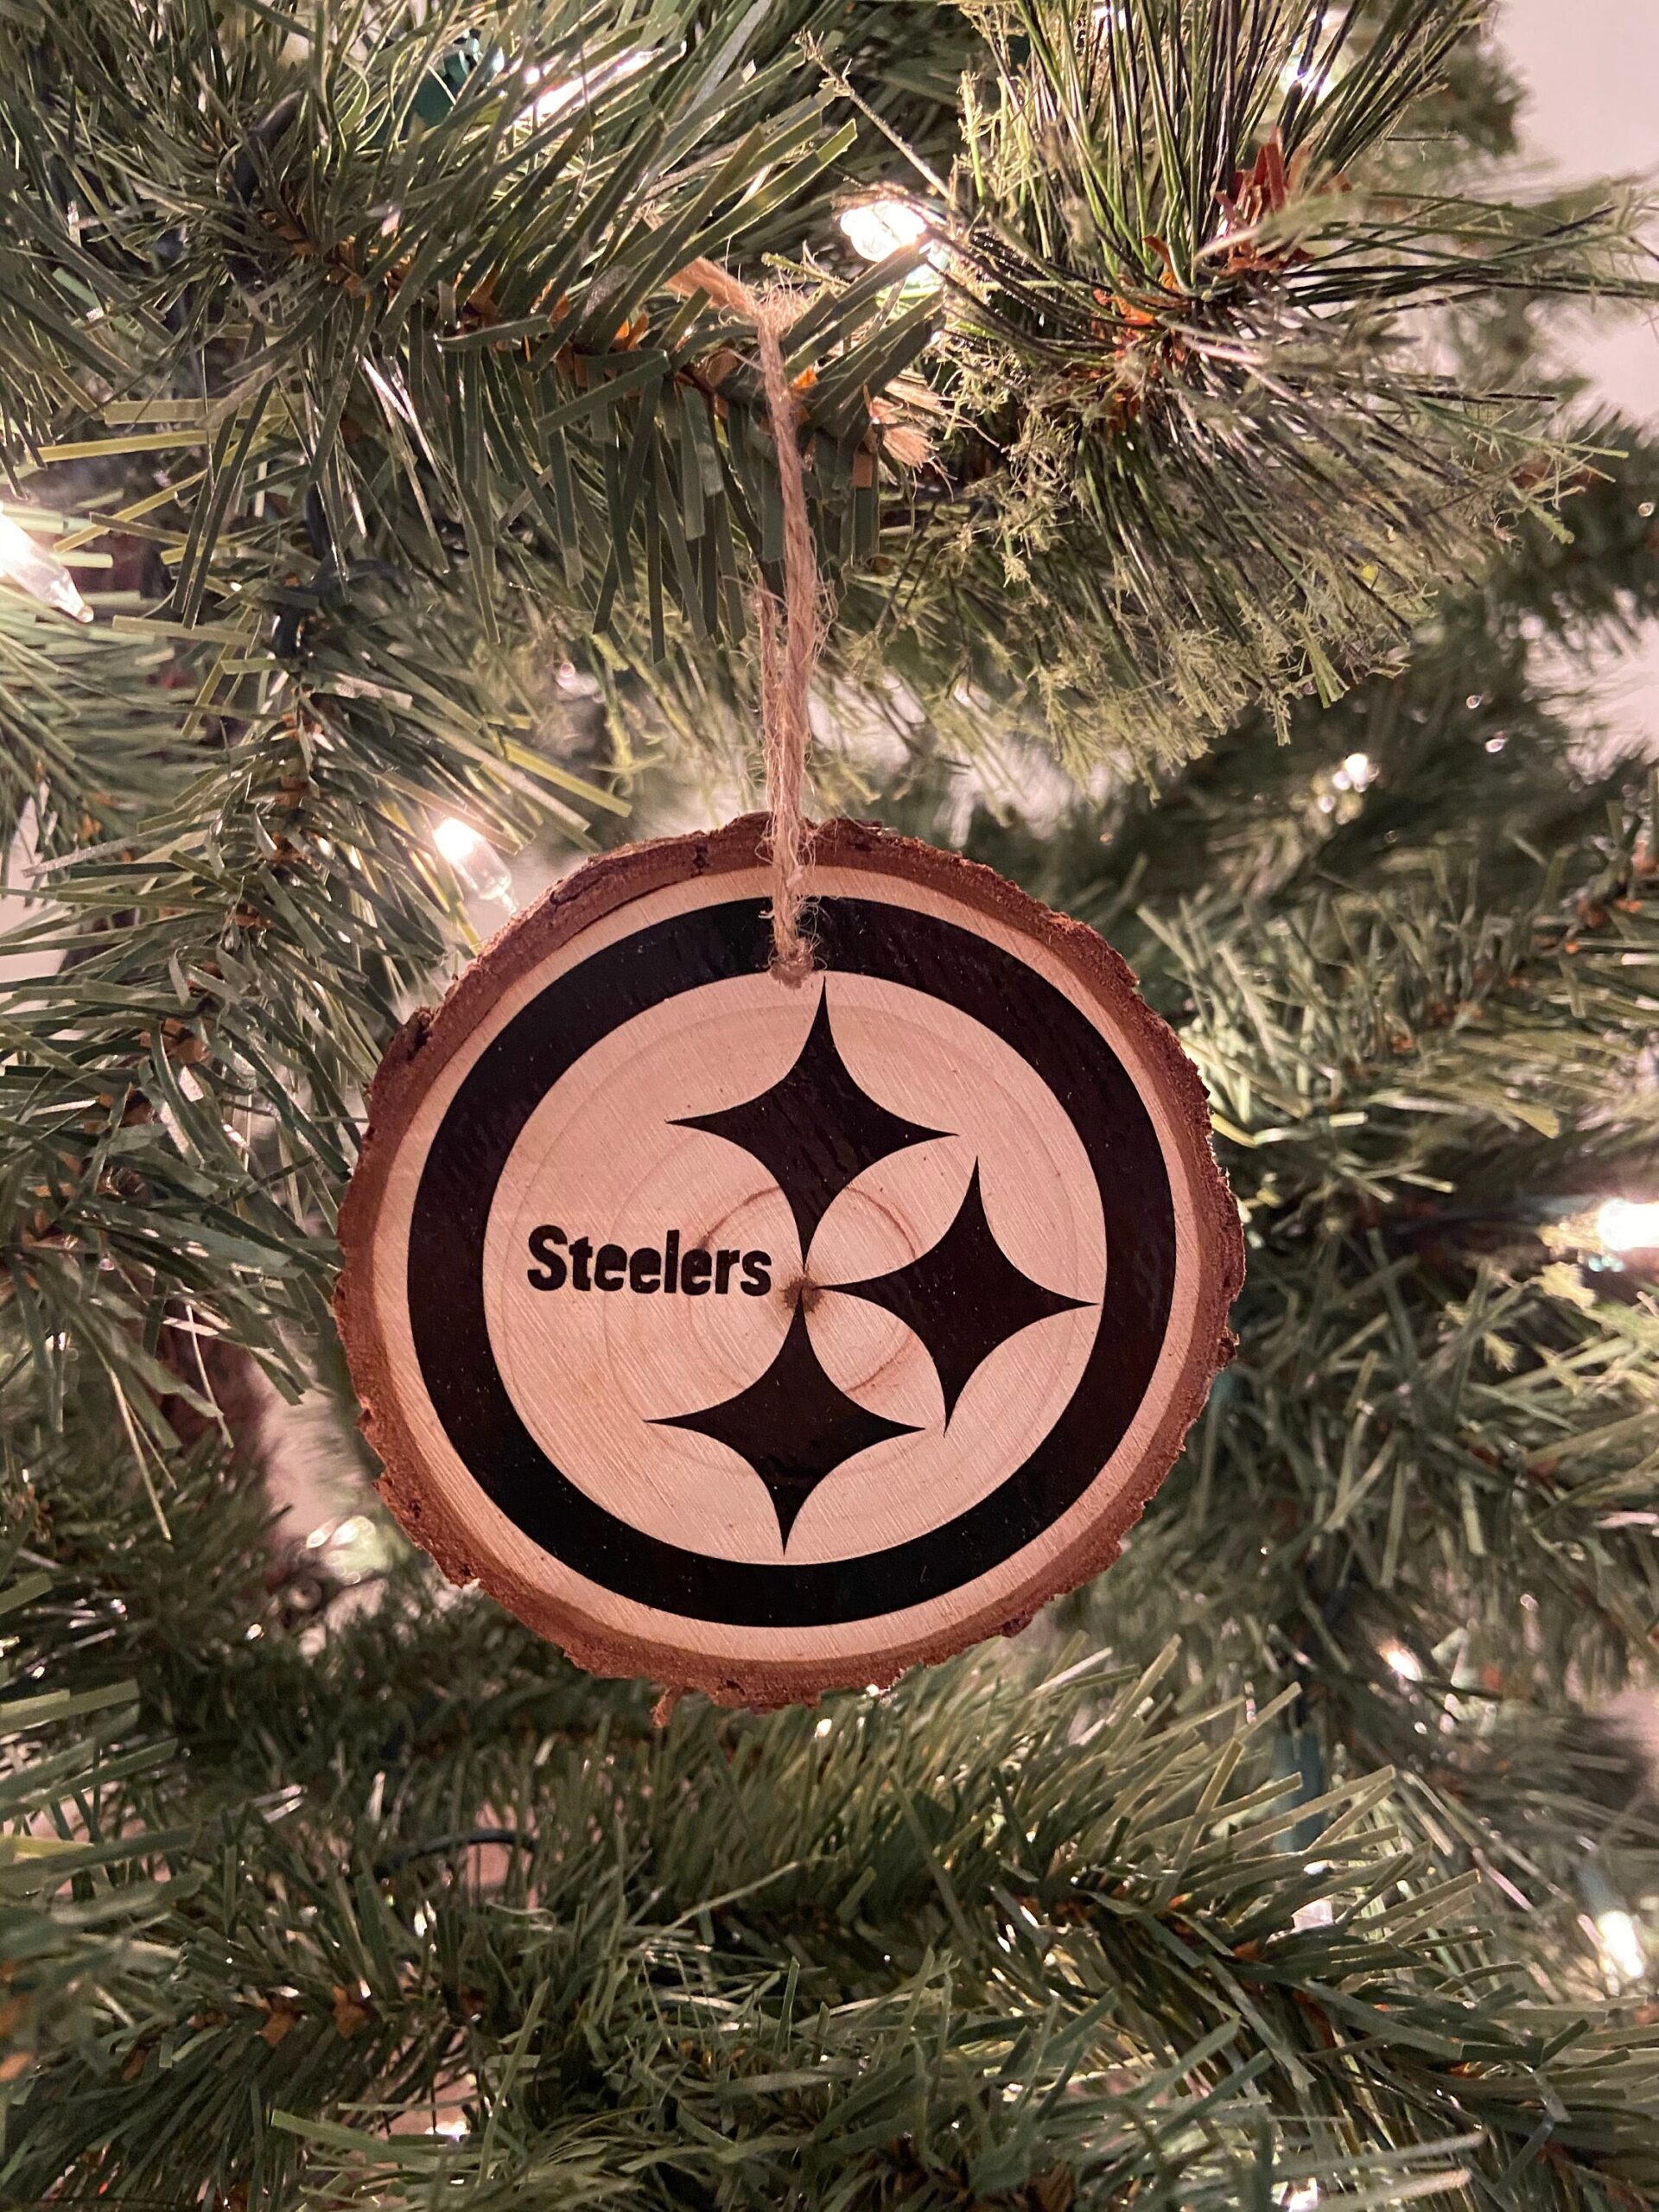 College Sports NFL Christmas Inspired Wood Ornaments - Teeholly